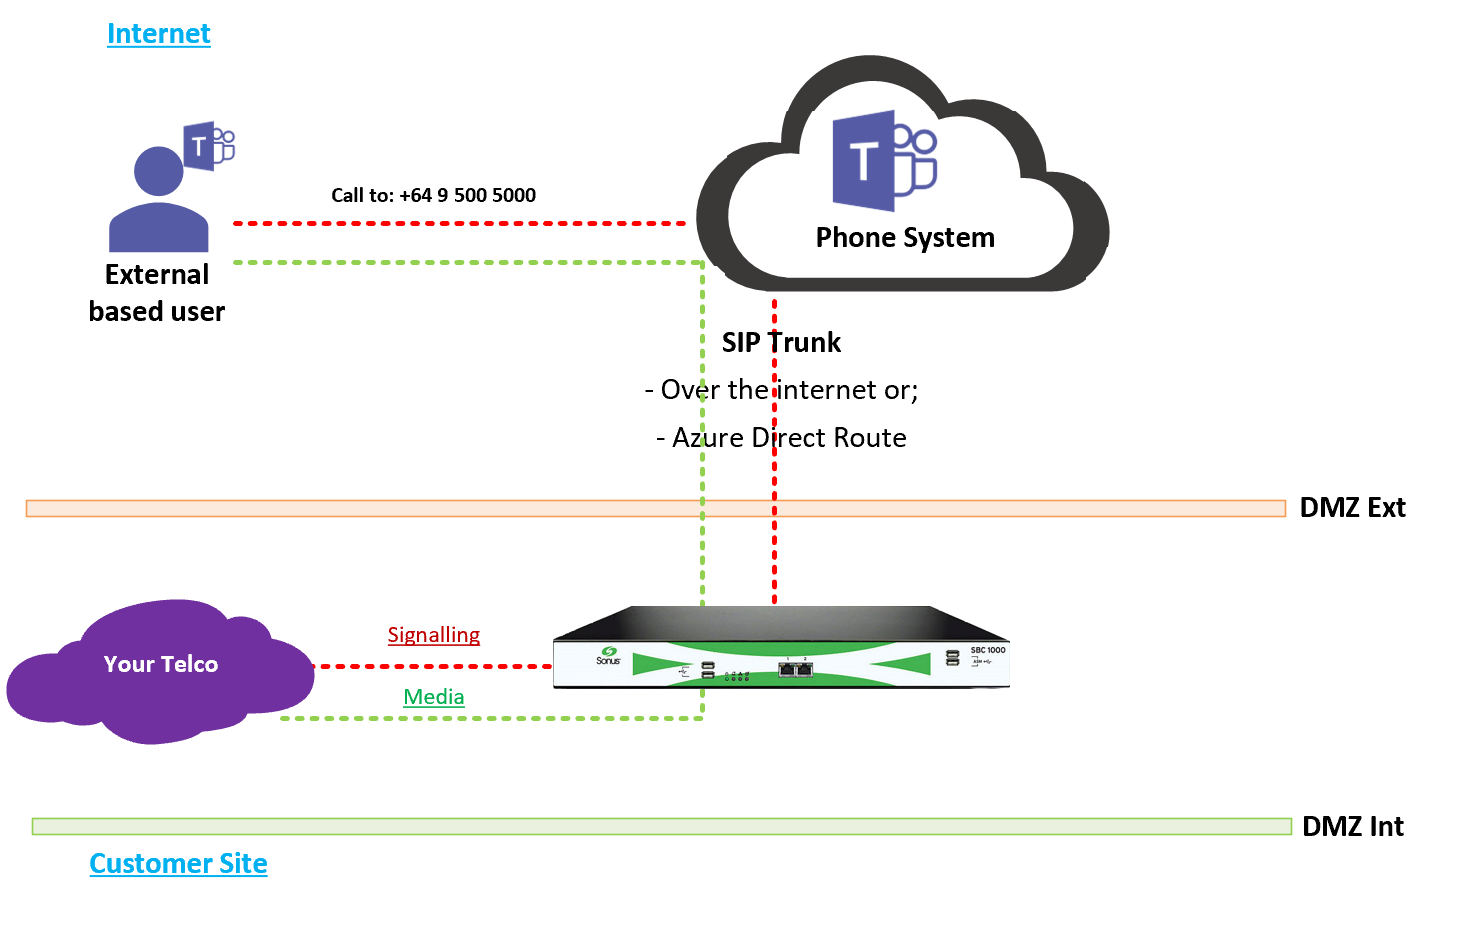 Microsoft Teams Direct Routing